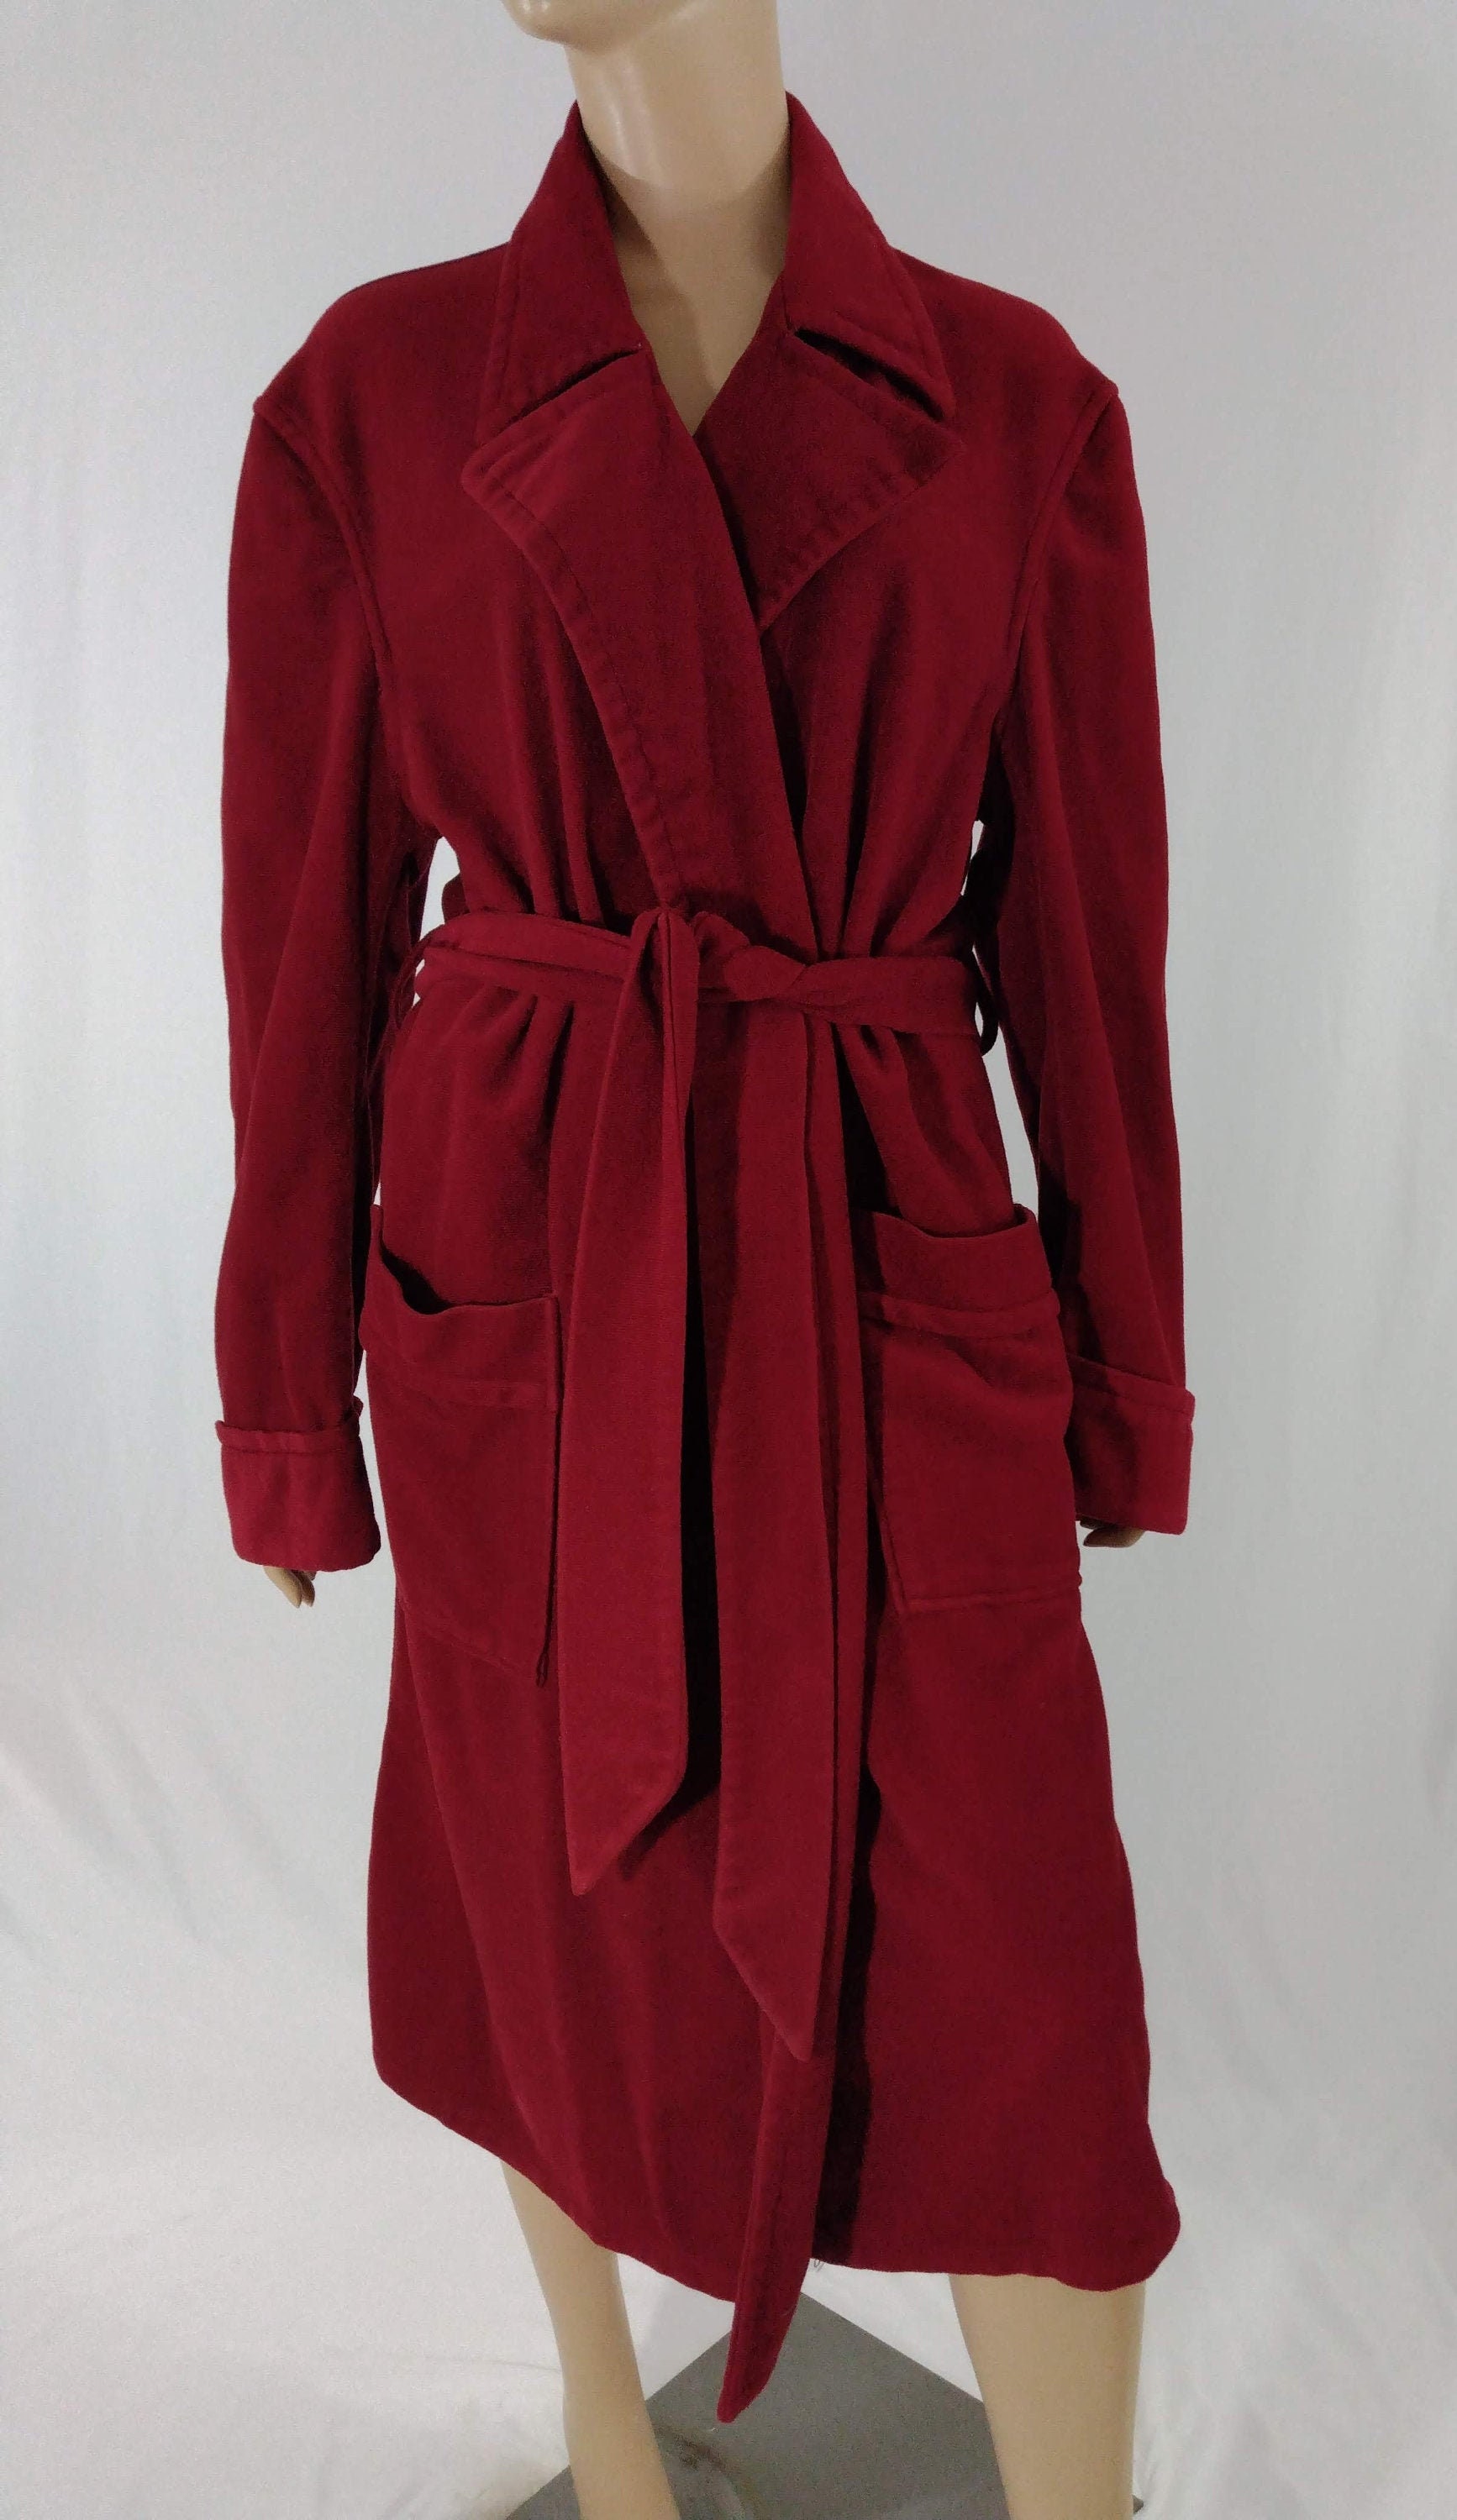 70's Men's Robe Velour Thick Deep Red Big Collar | Etsy